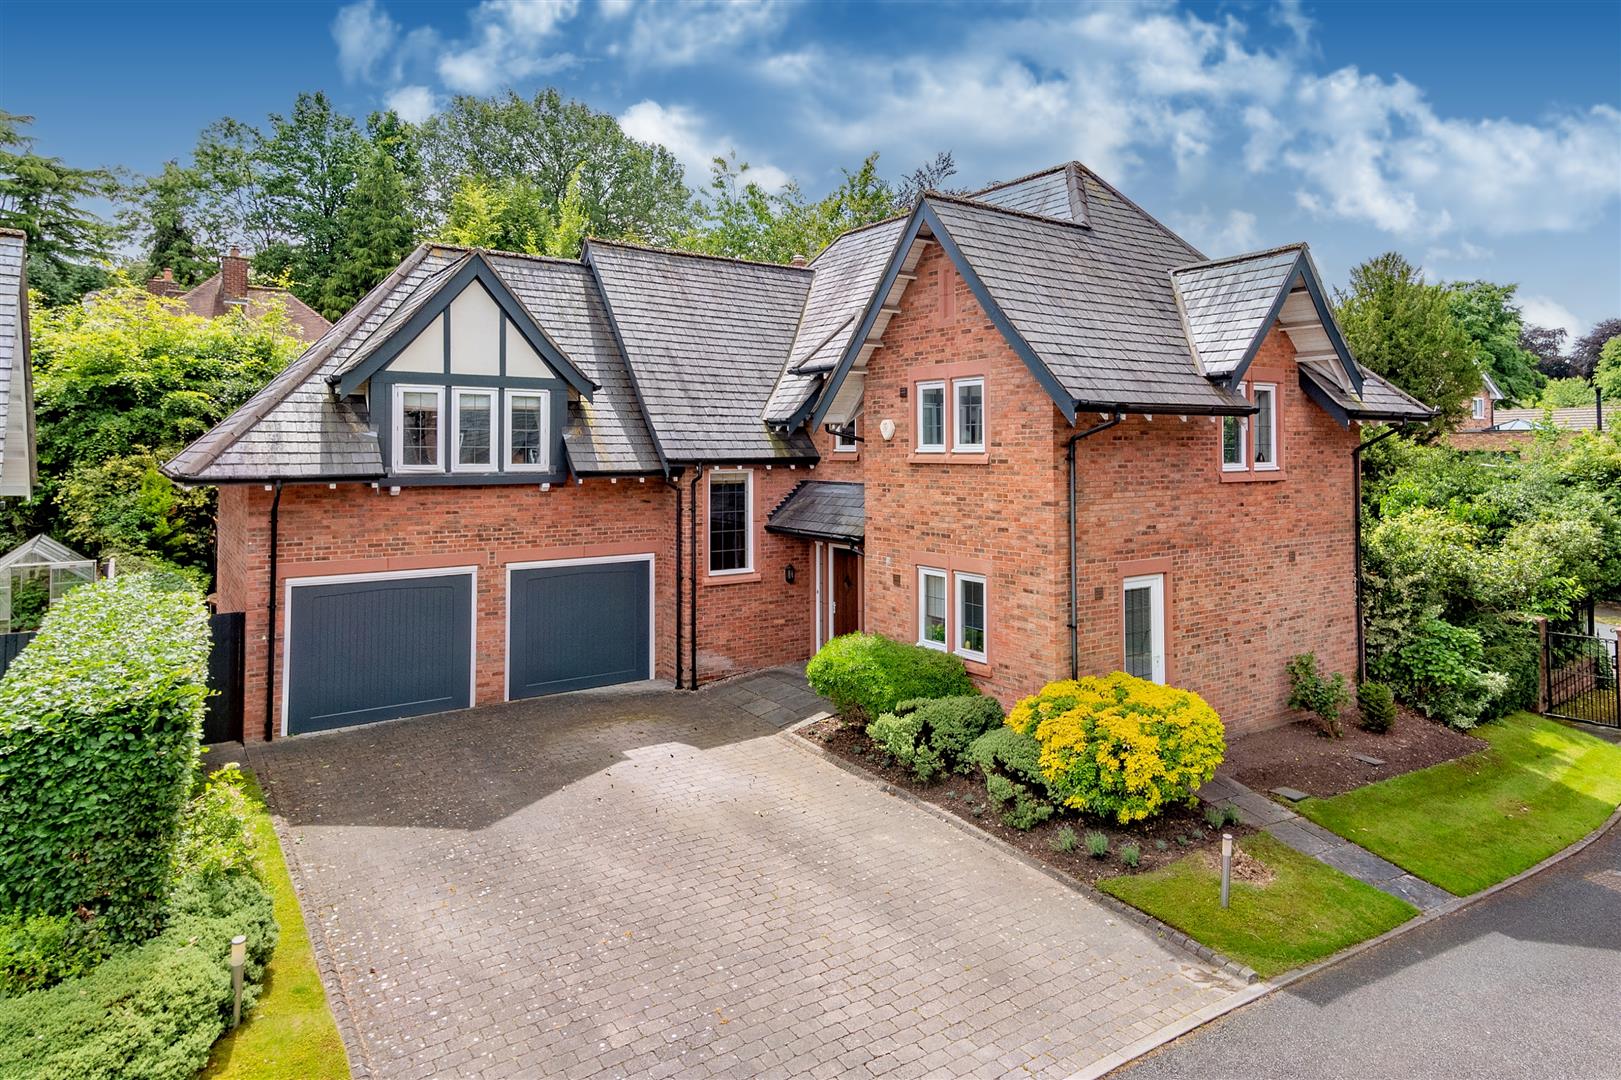 4 bed detached house for sale in Bonville Road, Altrincham - Property Image 1